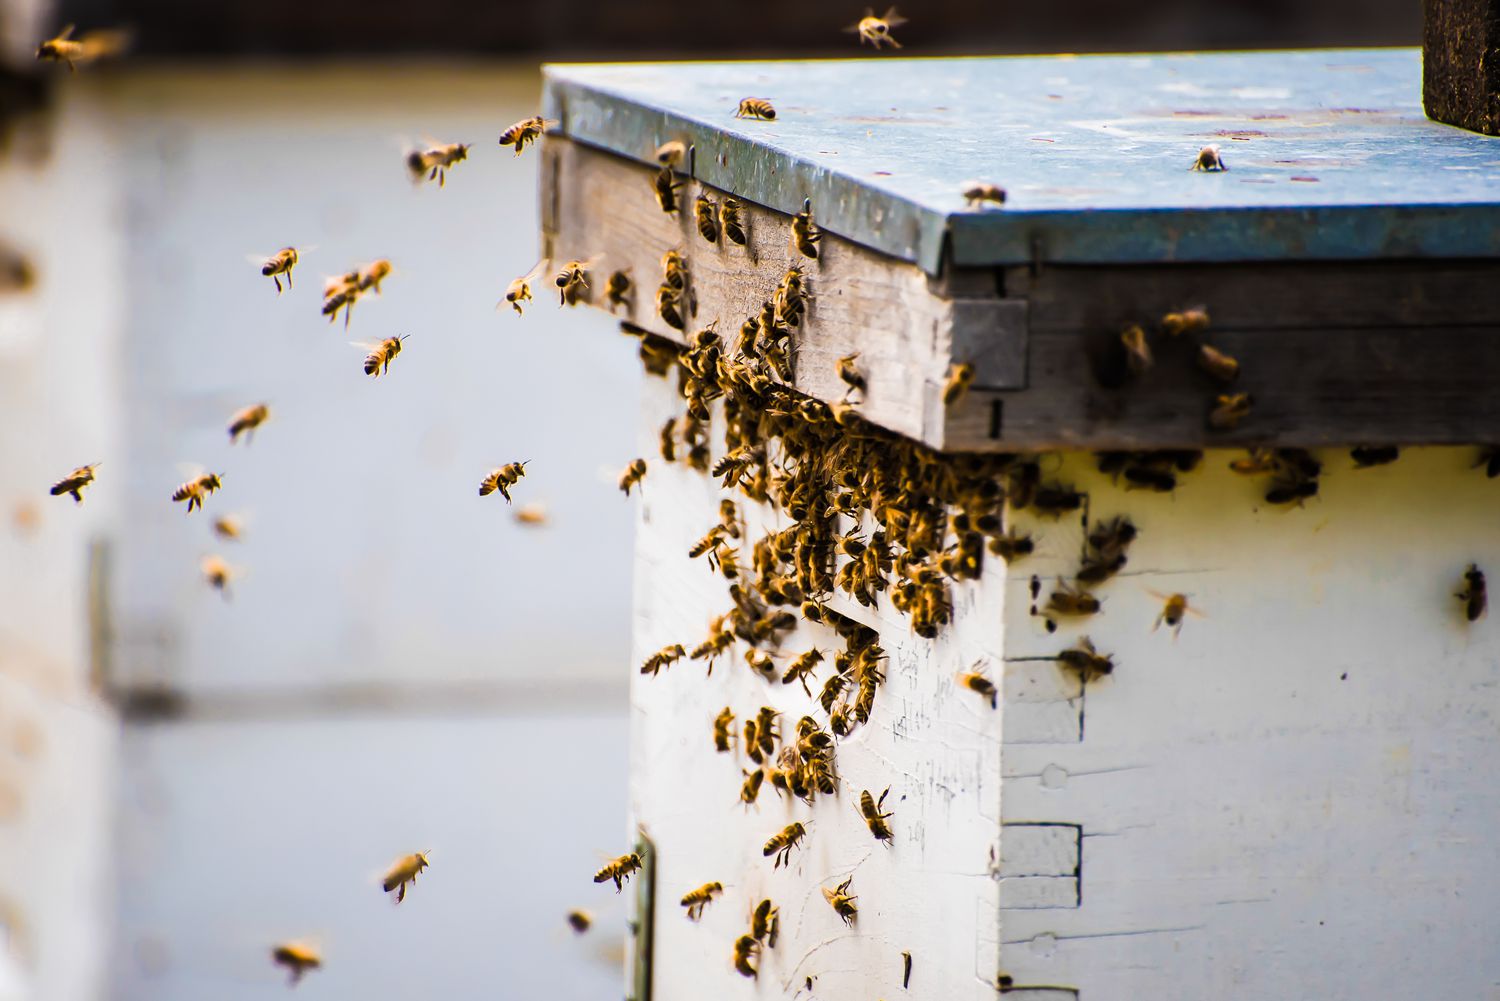 Bees returning to a beehive, Vancouver, British Columbia, Canada